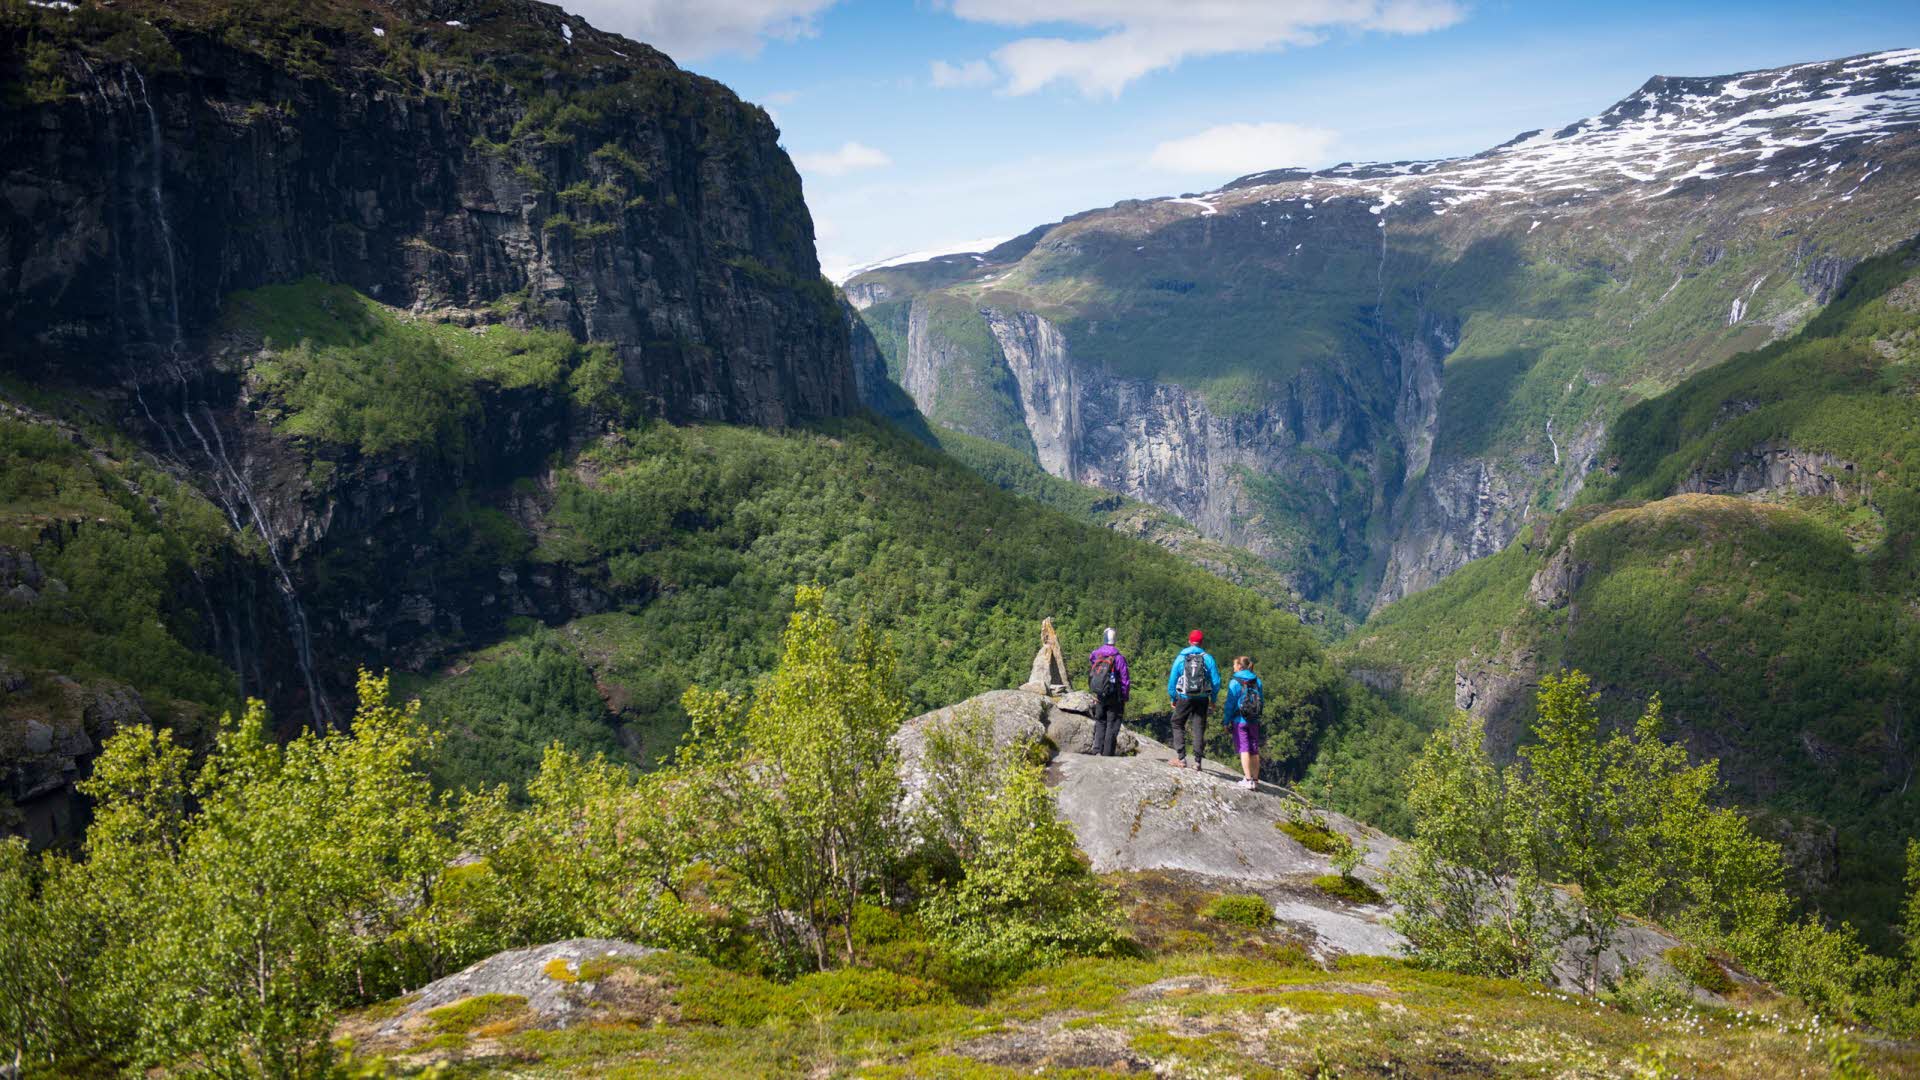 Hikers standing on a rock by a cairn marvelling at the scenery in the Aurland Valley. 